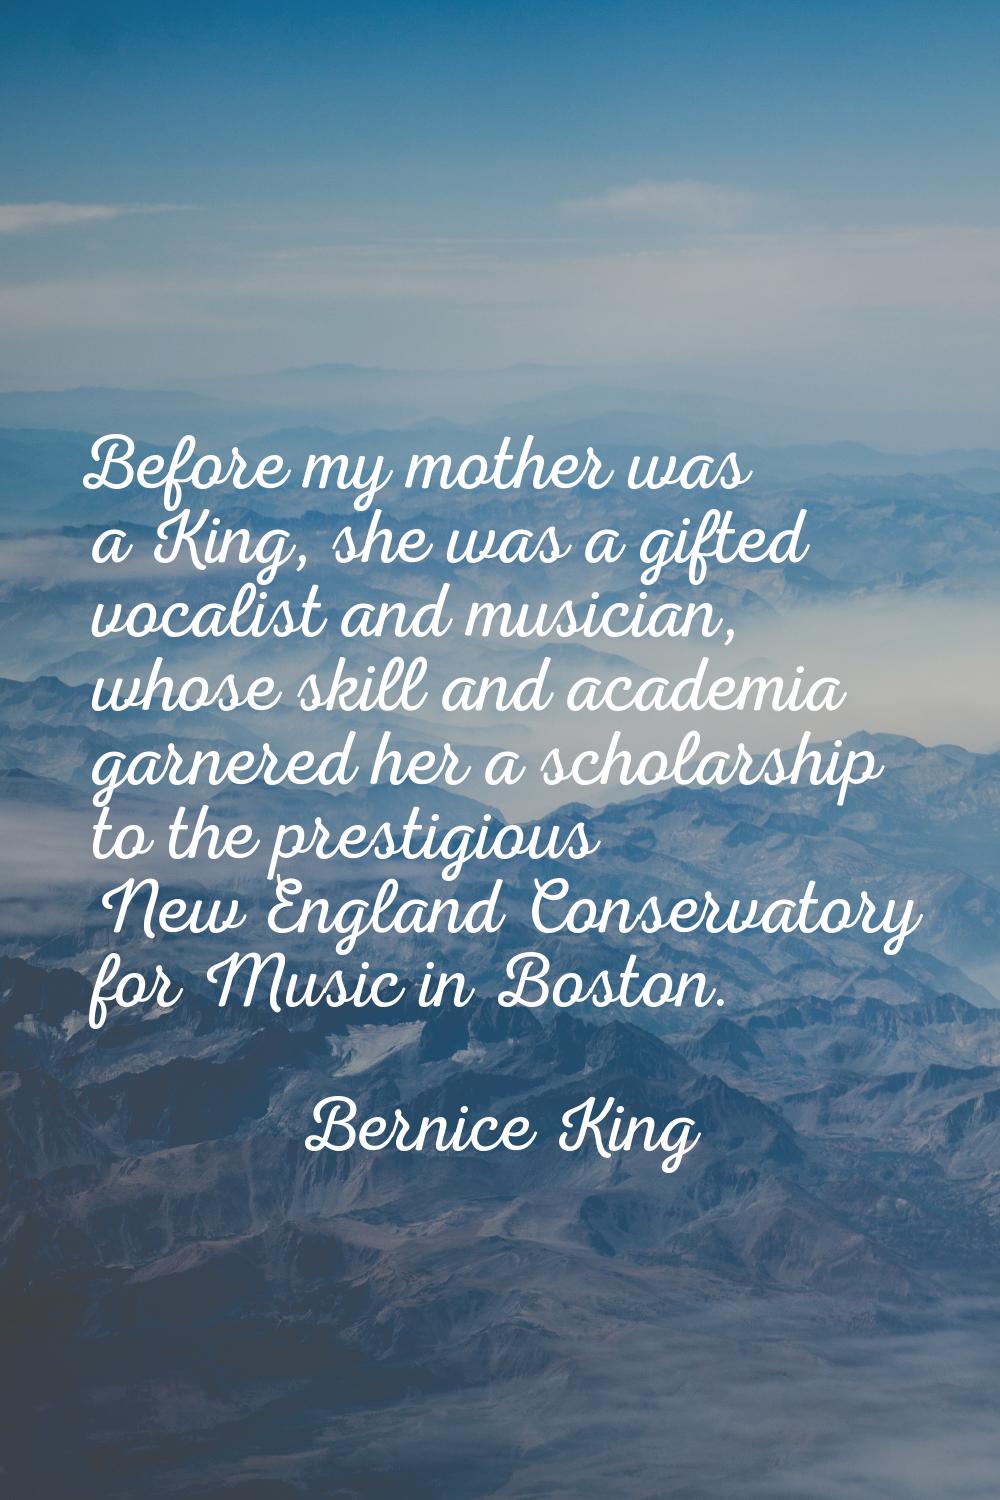 Before my mother was a King, she was a gifted vocalist and musician, whose skill and academia garne